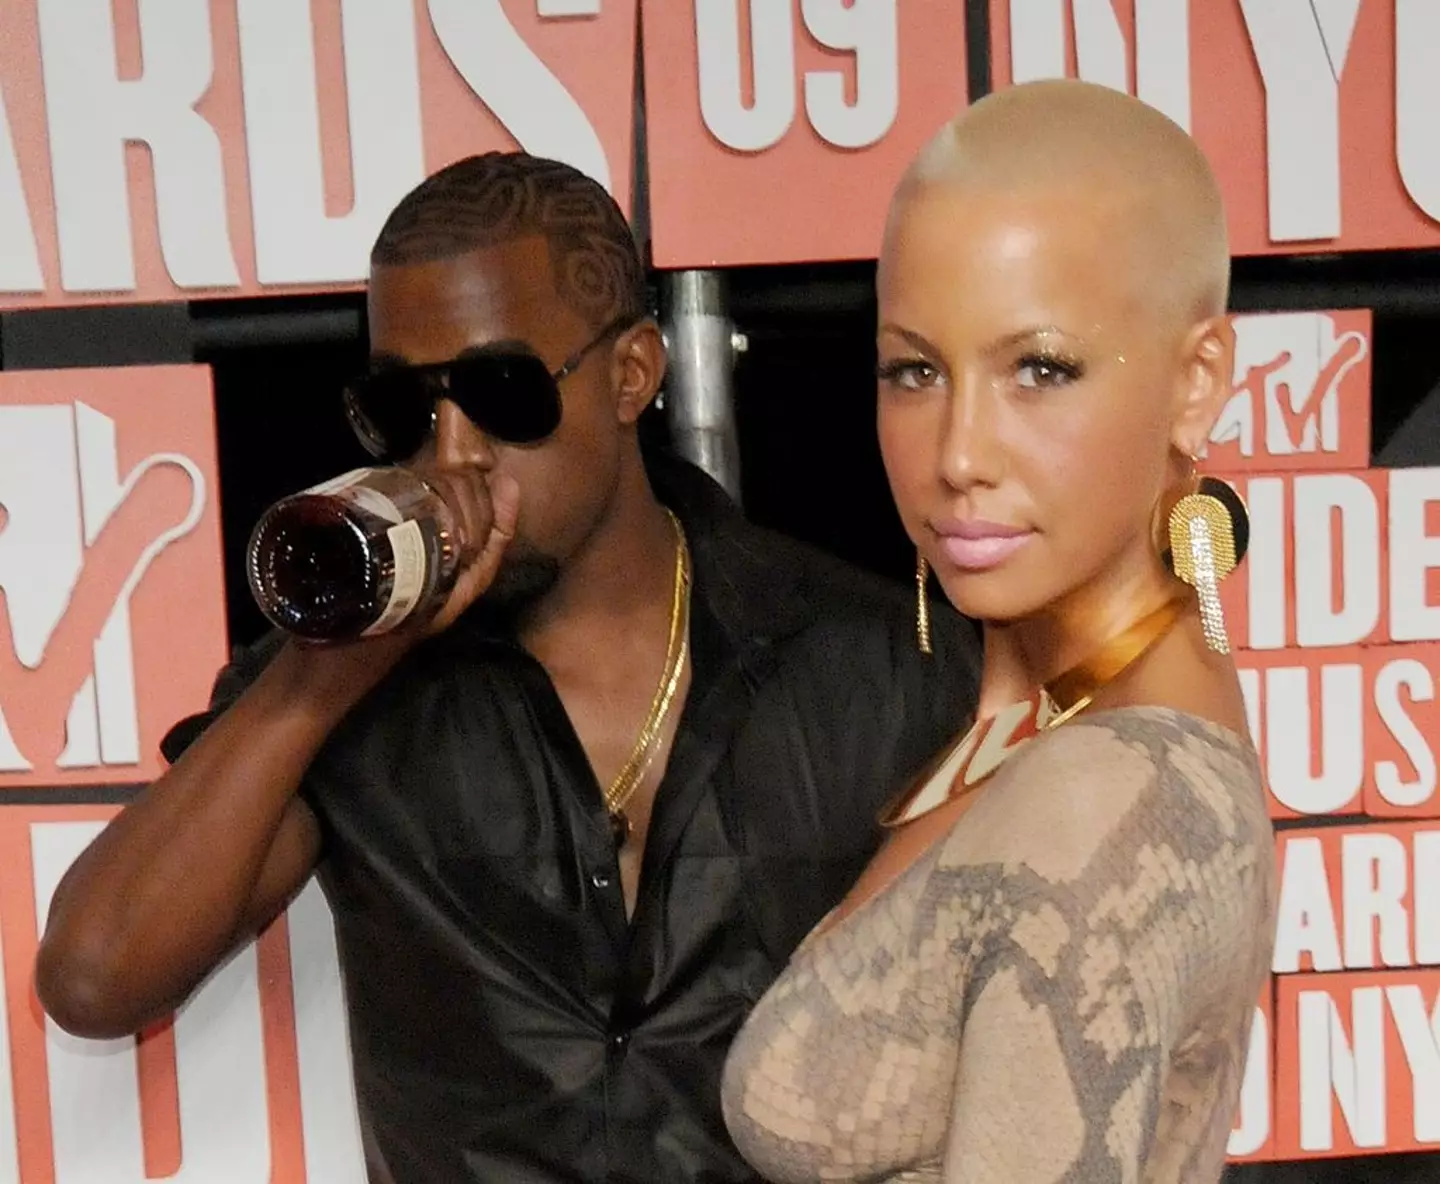 Kanye could be seen drinking the Hennessy (Gregg DeGuire/FilmMagic)